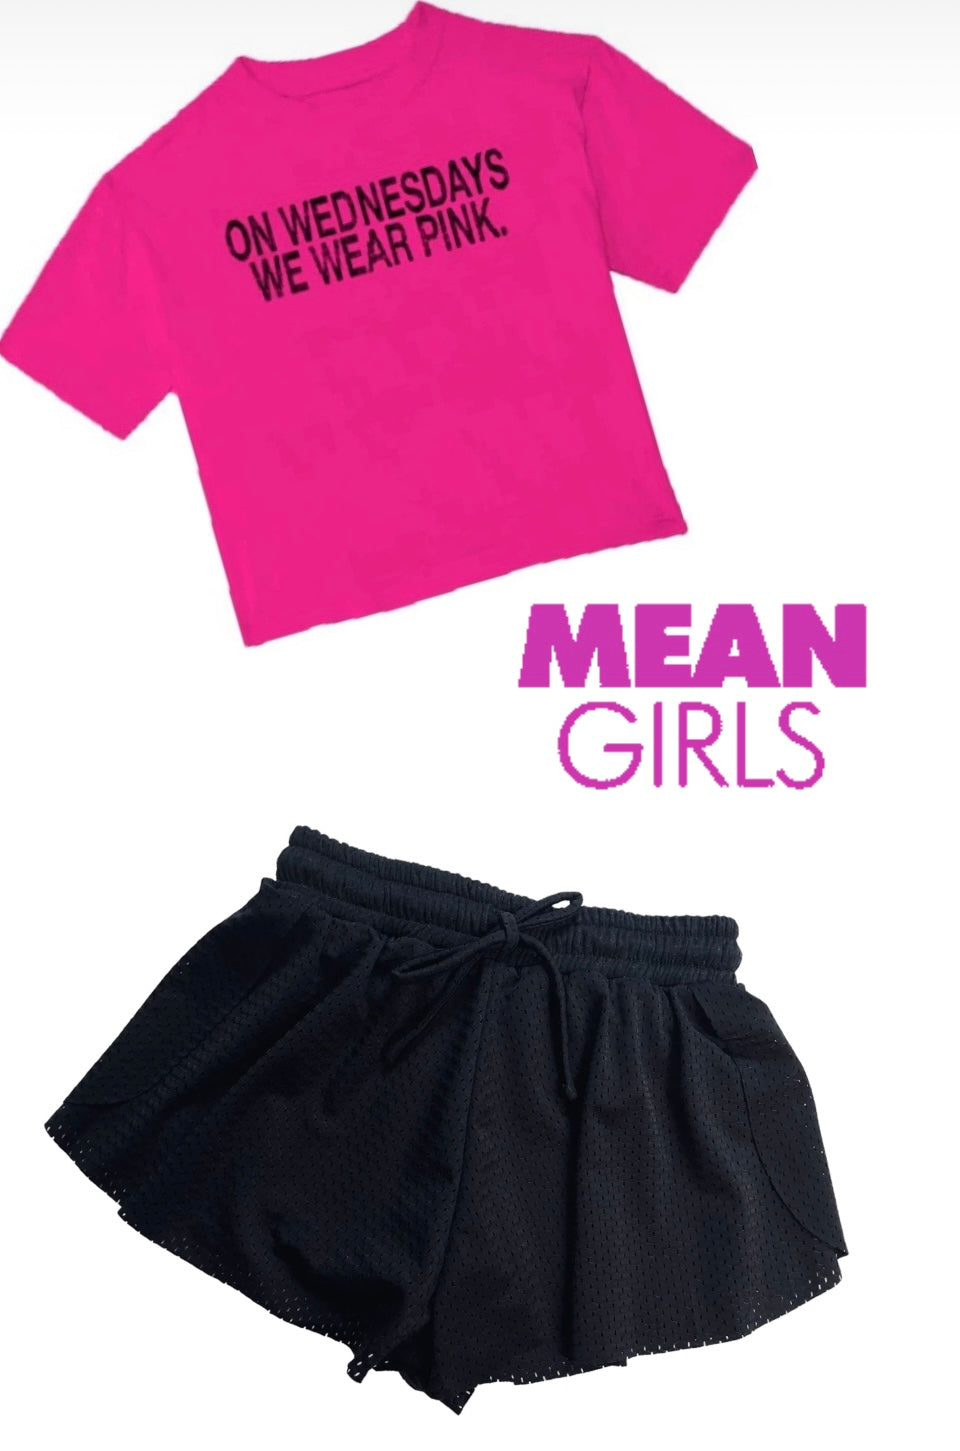 Prince Peter Mean Girls - On Wednesdays We Wear Pink